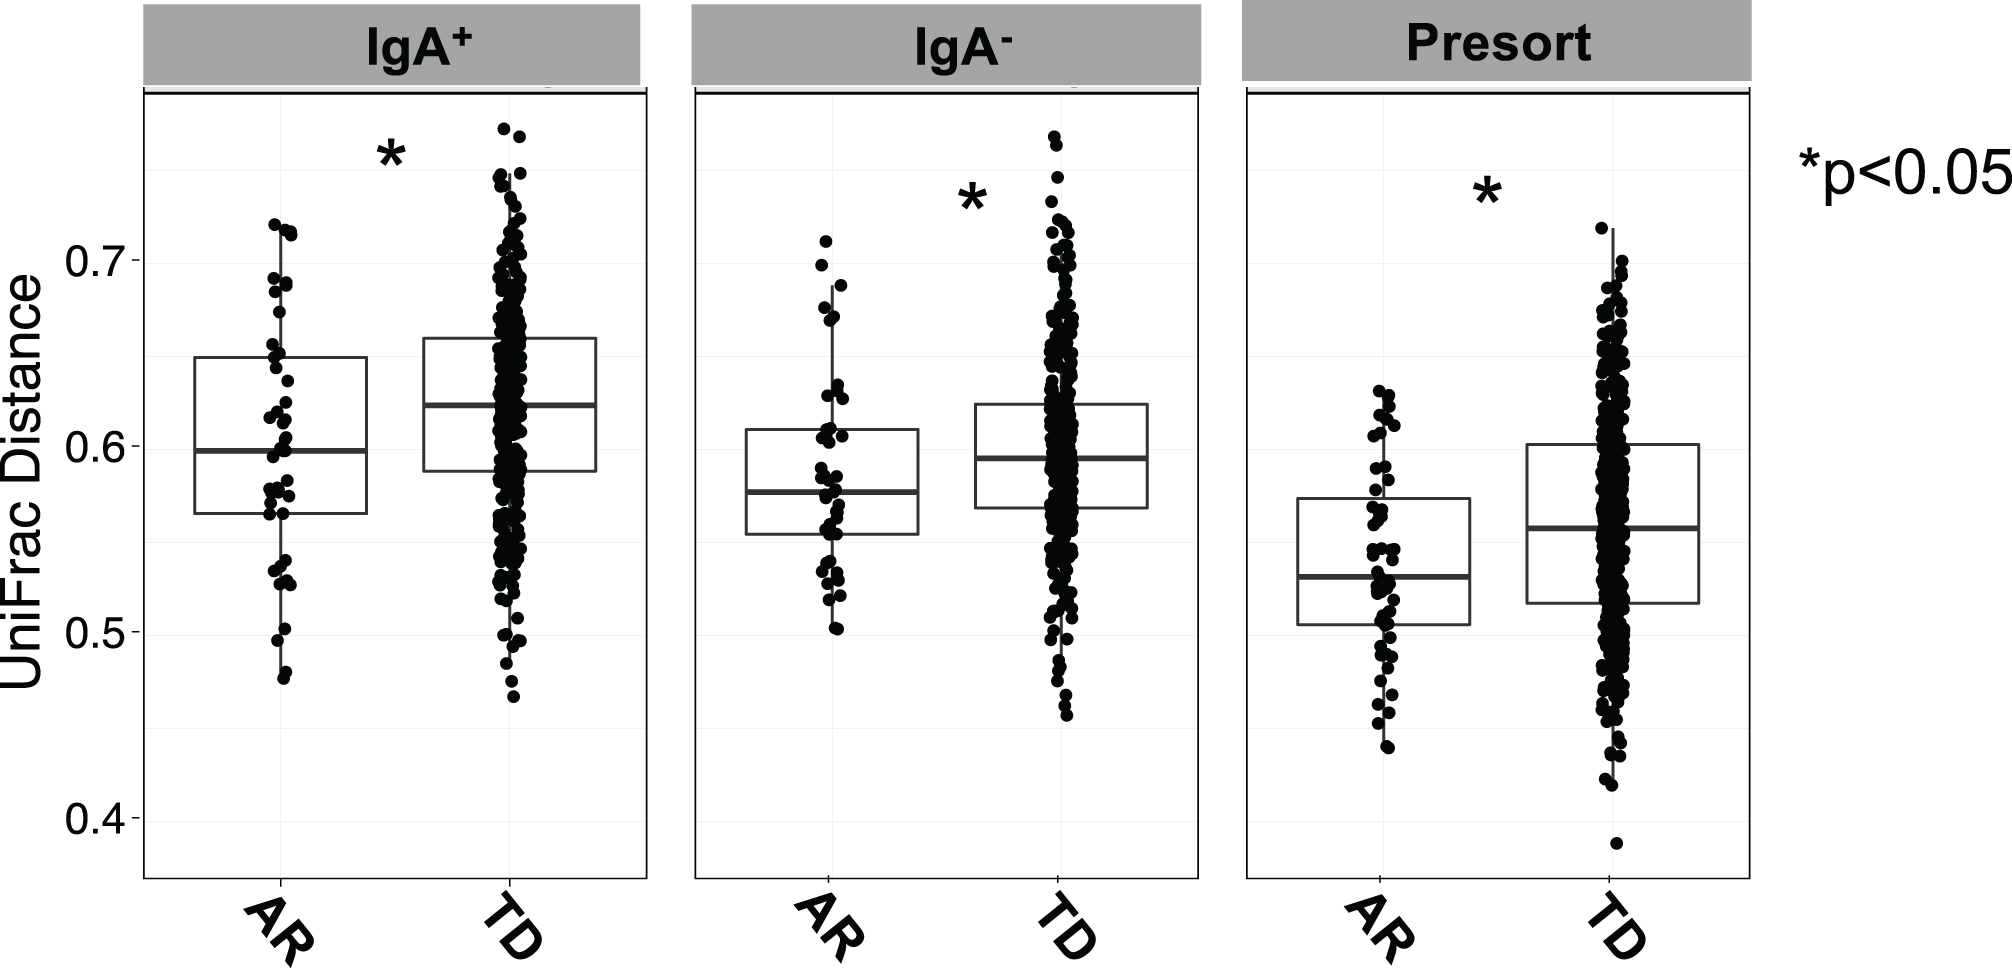 Box plots depict unweighted UniFrac dissimilarities by IgA-Biome profile according to Parkinson’s disease clinical subtype. UniFrac distances closer to 1 indicated higher community similarity. *p < 0.0385 (IgA+), *p < 0.0442 (IgA–), and *p < 0.0133 (presort) Mann-Whitney t-test.